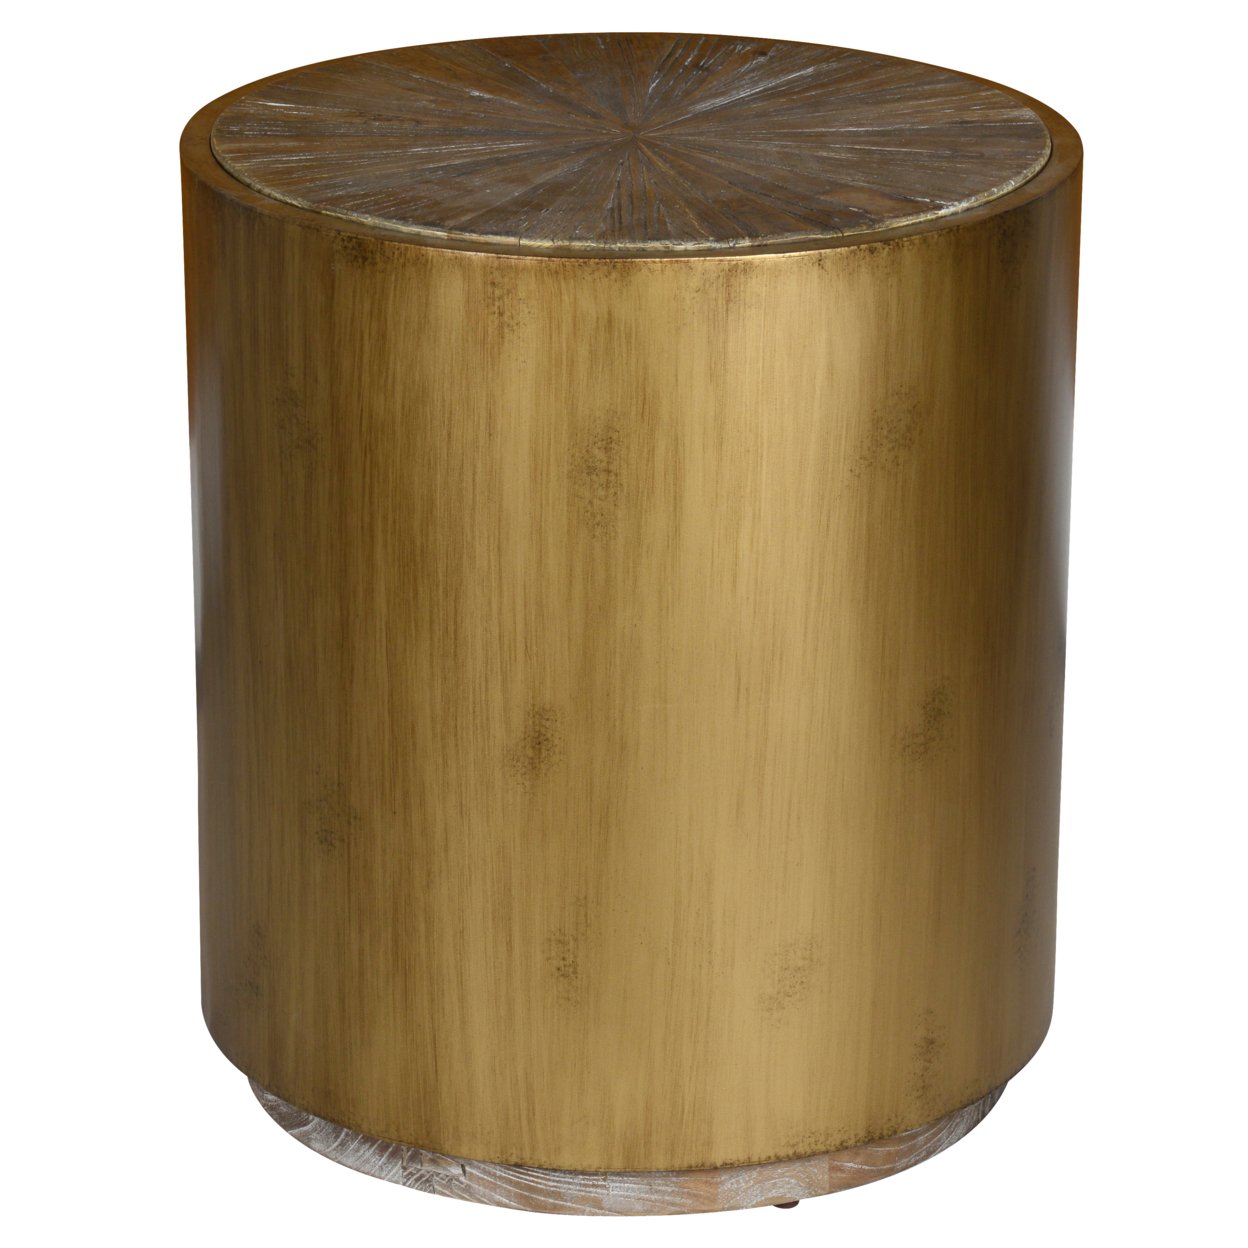 Wood And Metal End Table, Brown And Gold- Saltoro Sherpi